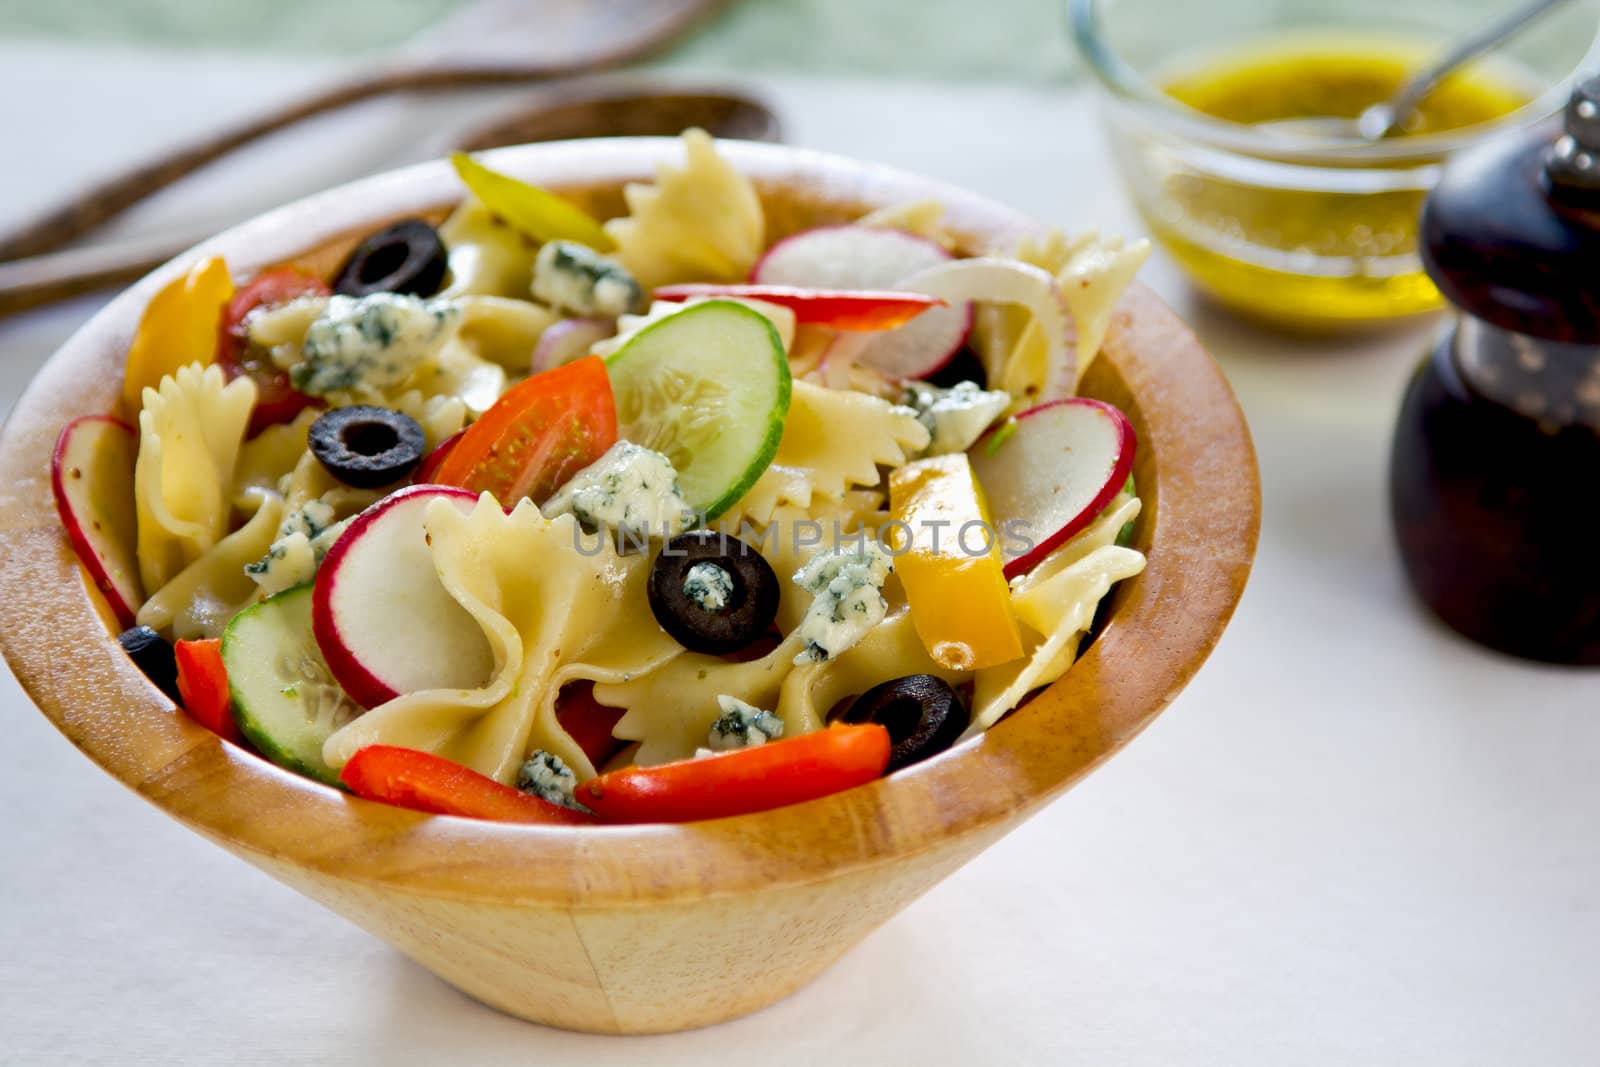 Farfalle with Blue cheese ,pepper,radish and olive salad